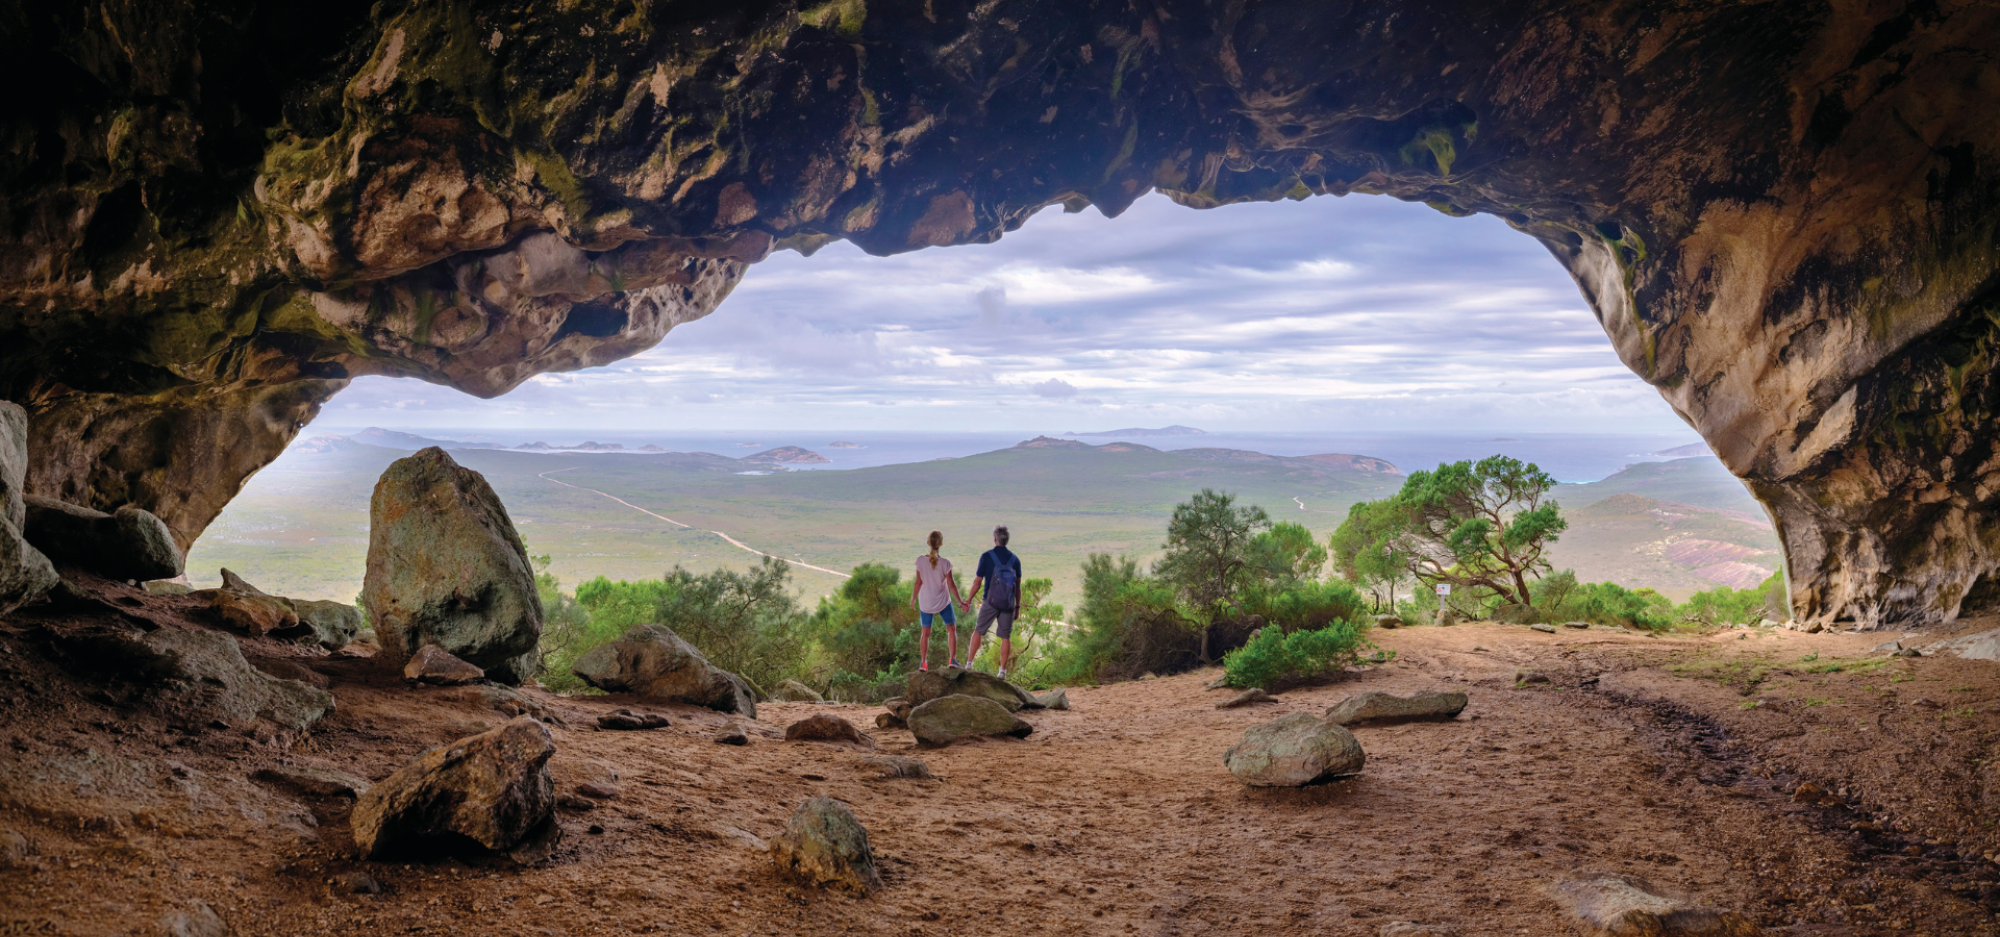 A wide angled shot of two people holding hands with their back to the camera, standing in the mouth of a large cavern. A green landscape stretches out before and beneath them